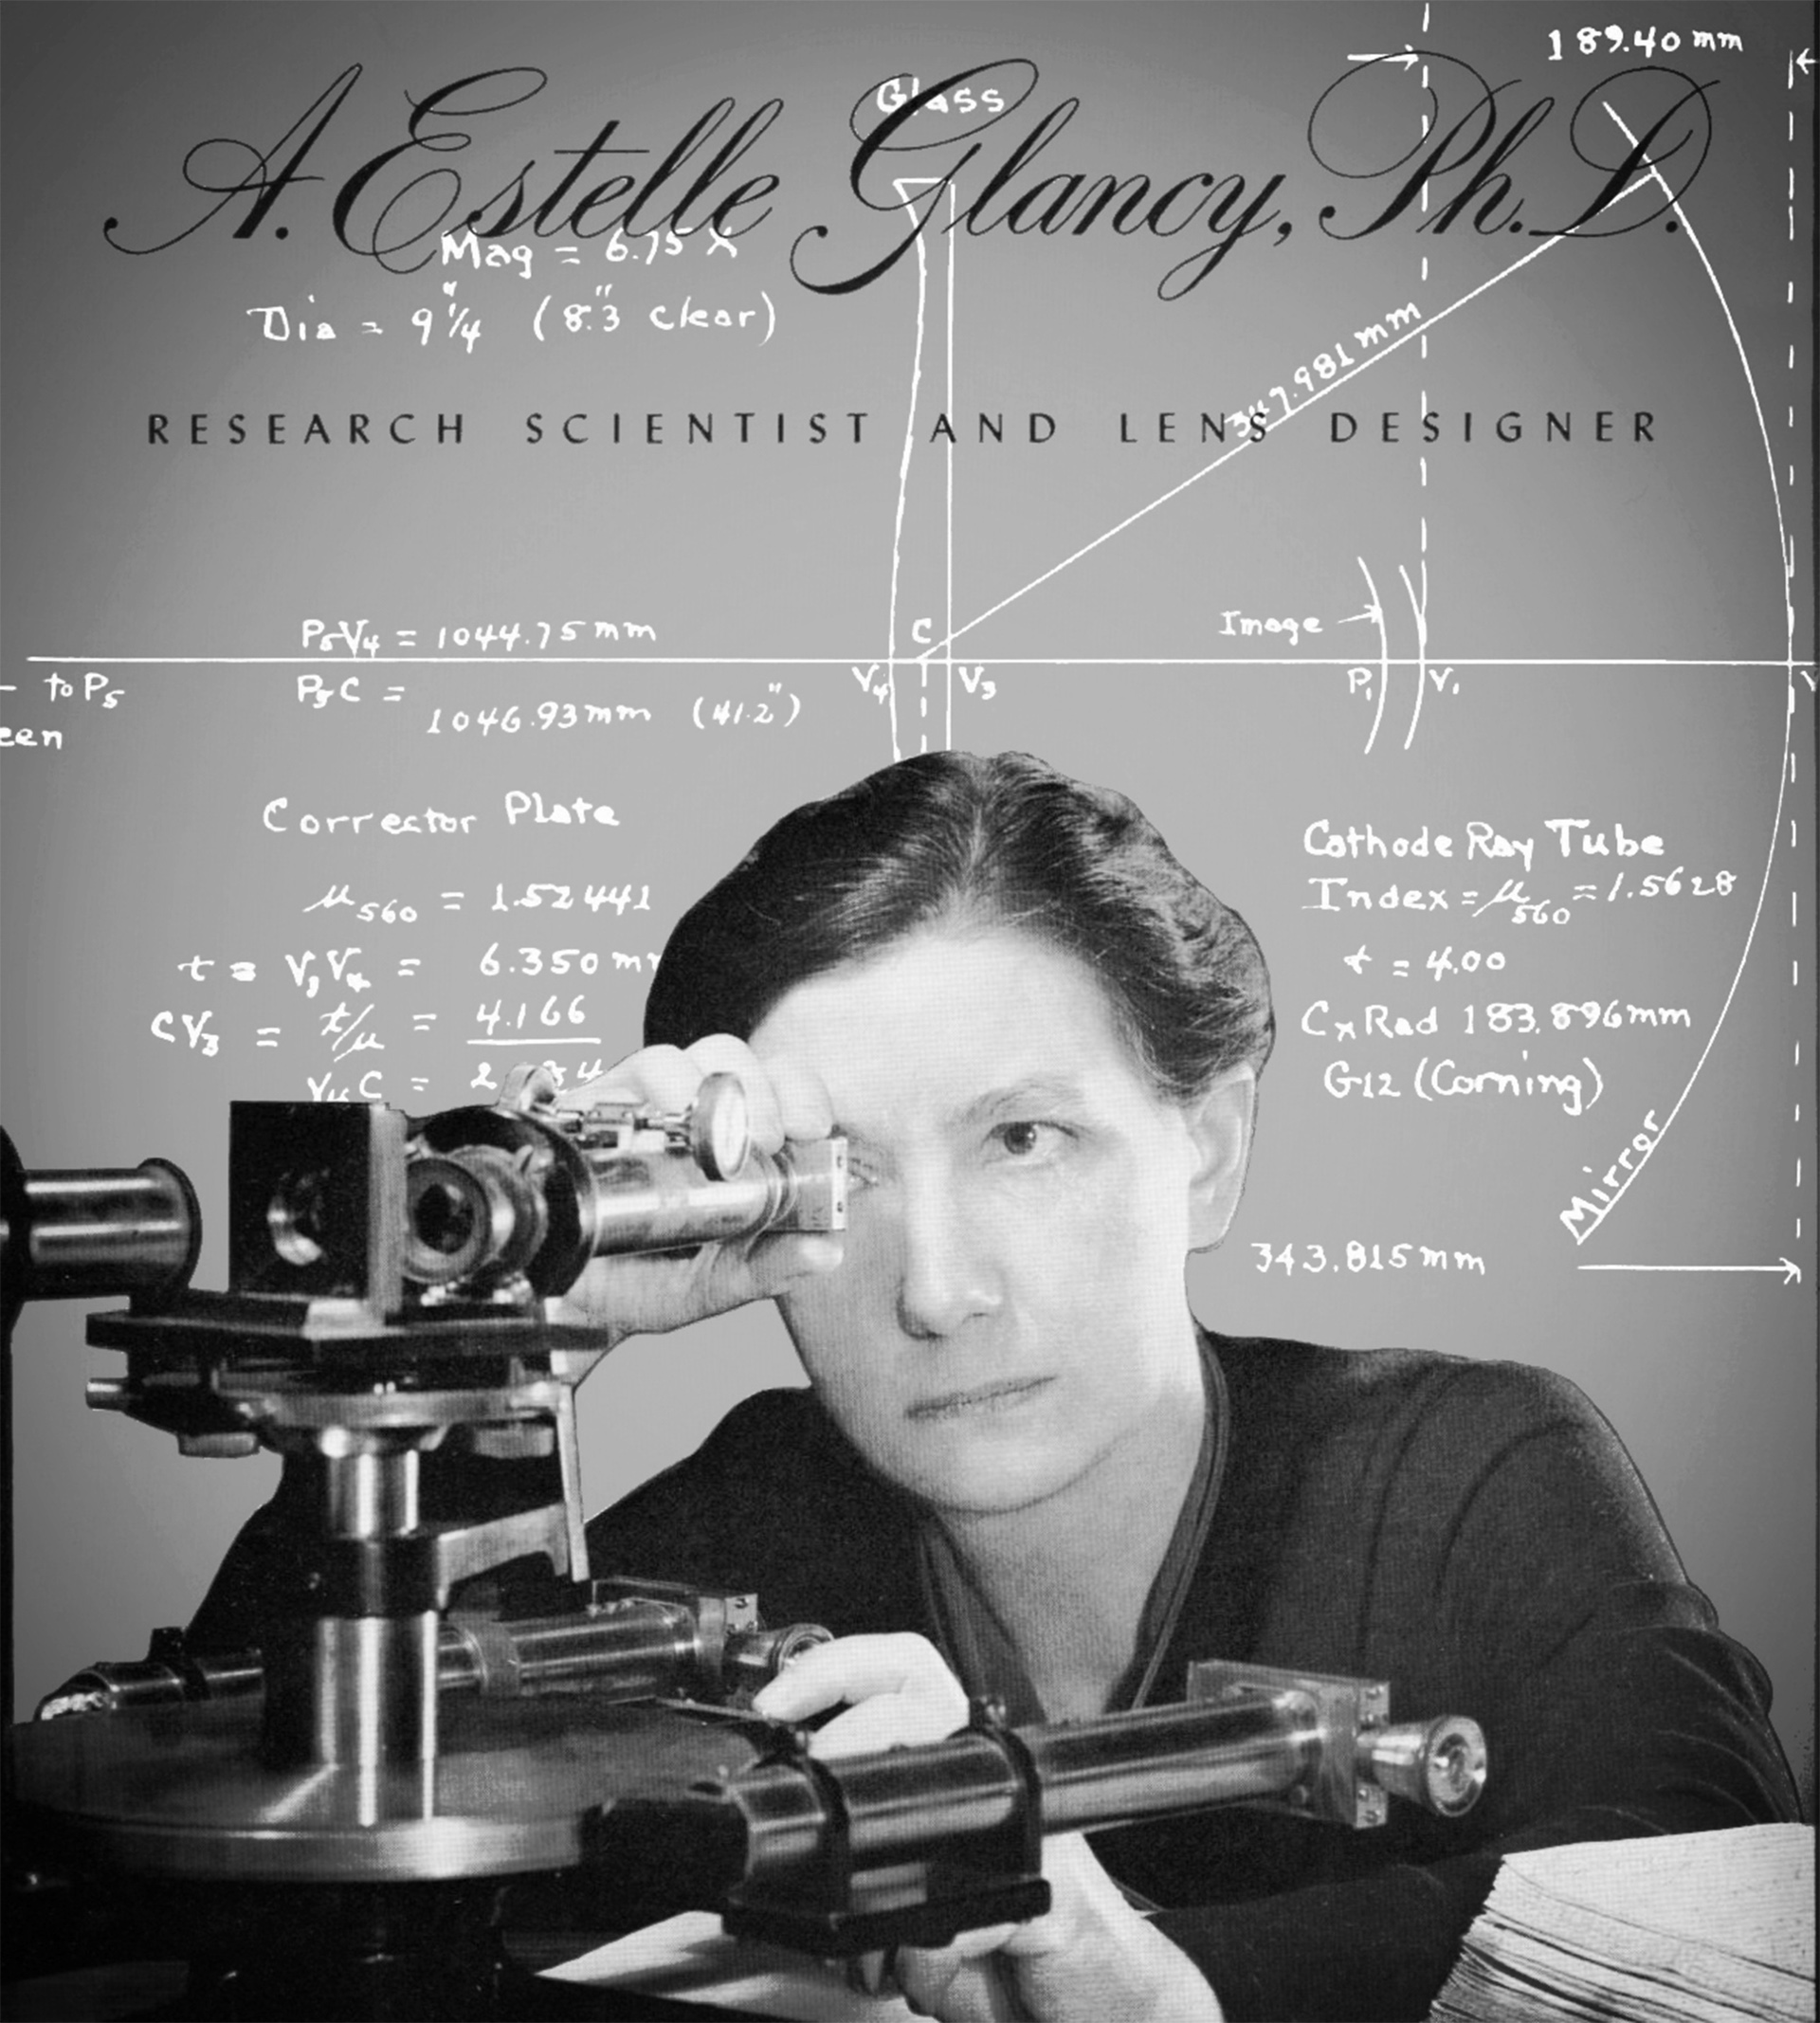 A 1930 magazine cover showing a woman (Dr. Anna Estelle Glancy) looking through a microscope. The headline reads: A. Estelle Glancy Ph.D., Research Scientist and Lens Designer